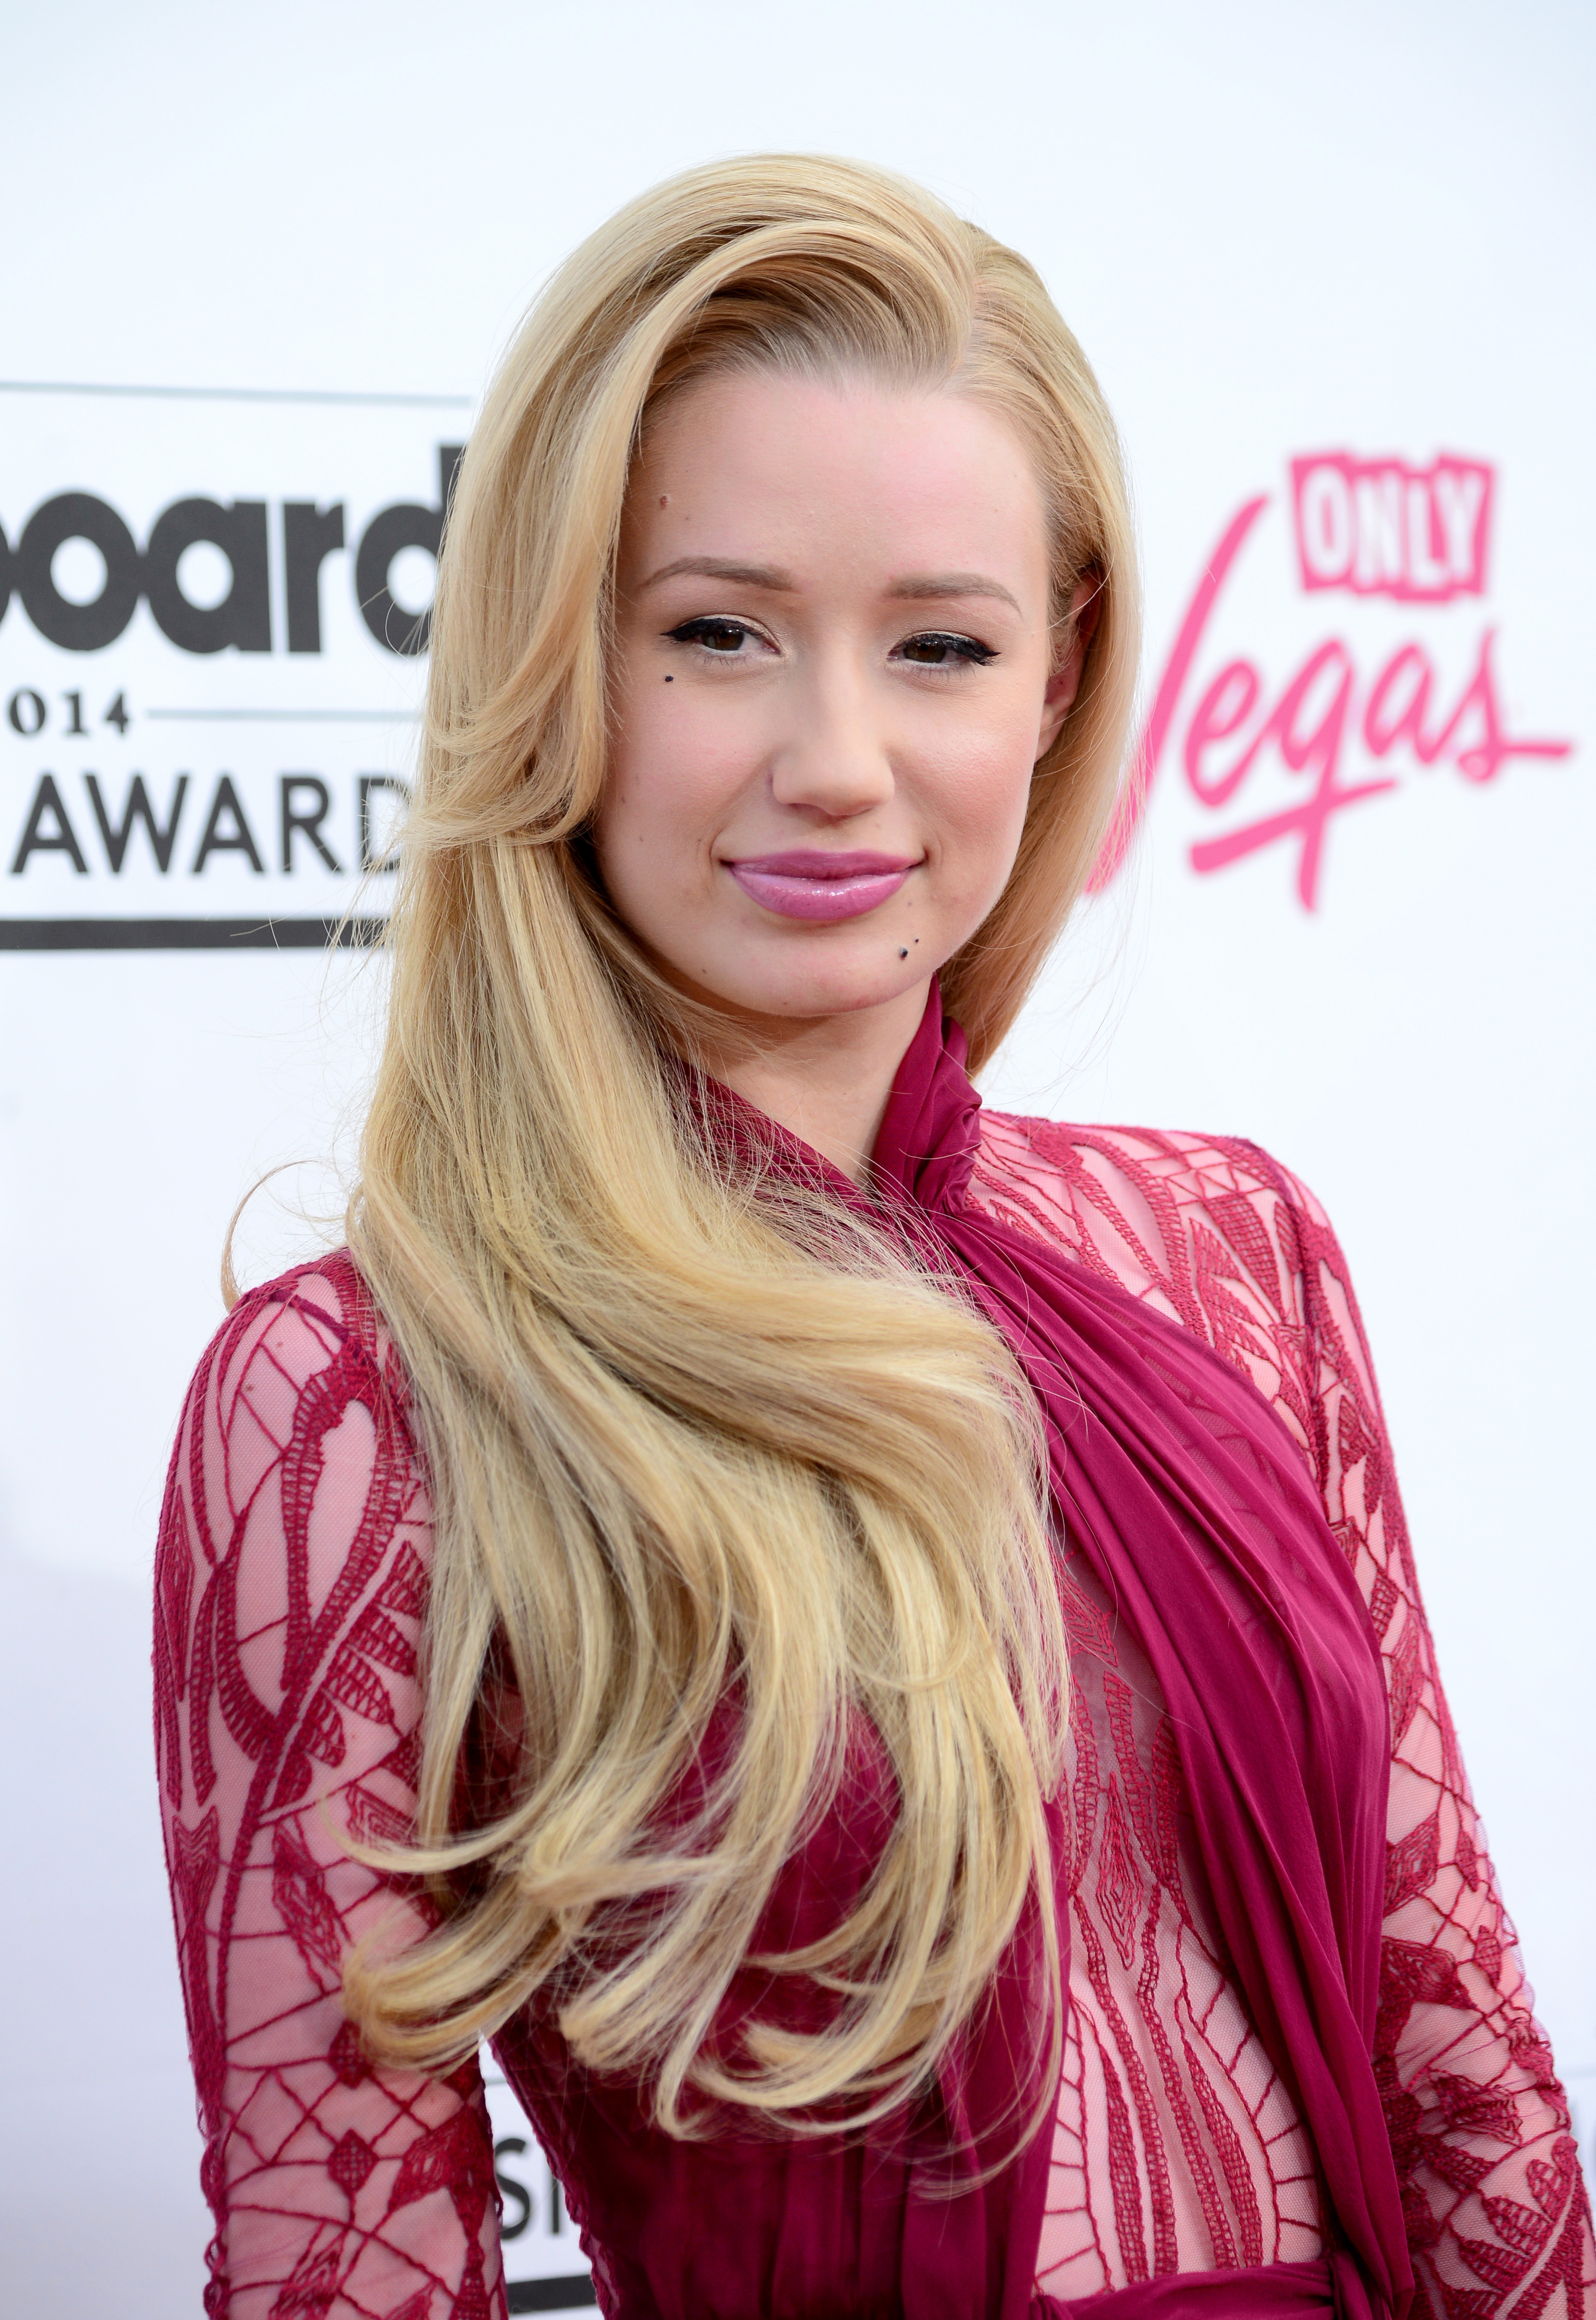 krise Plateau eskortere Iggy Azalea & Snoop Dogg are Feuding & They Both Need a Time-Out